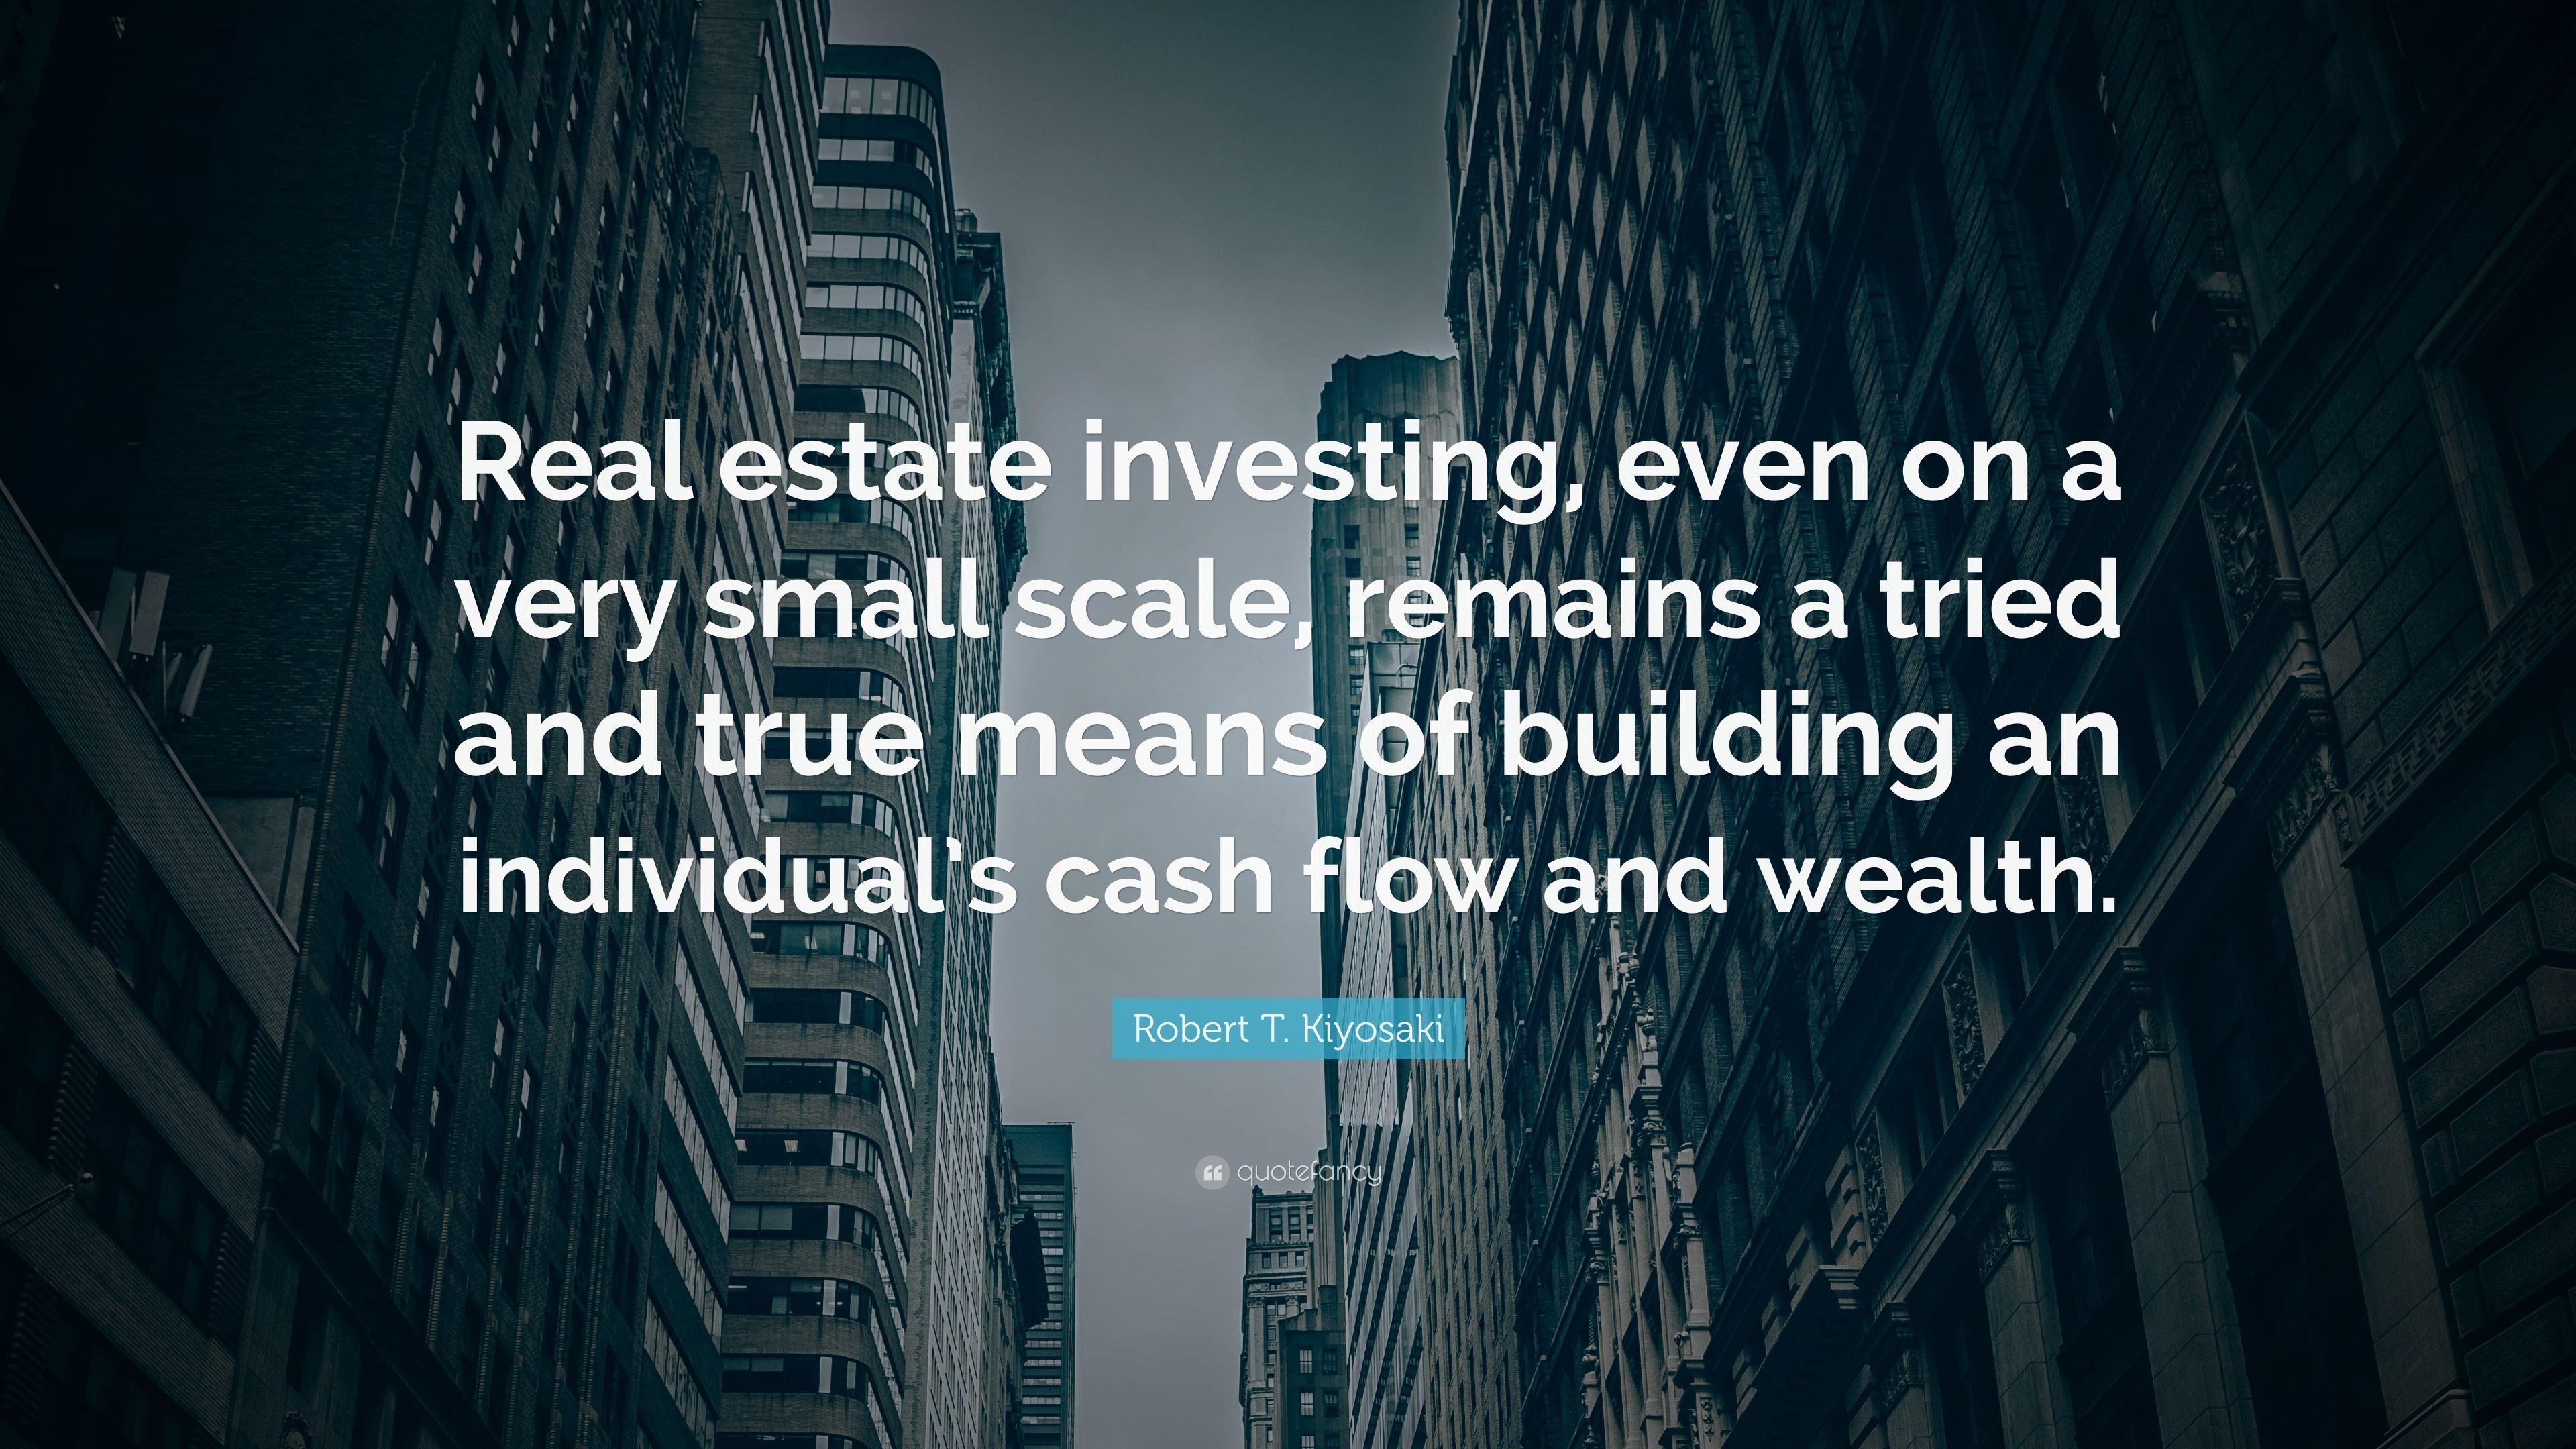 Robert T. Kiyosaki Quote: “Real estate investing, even on a very